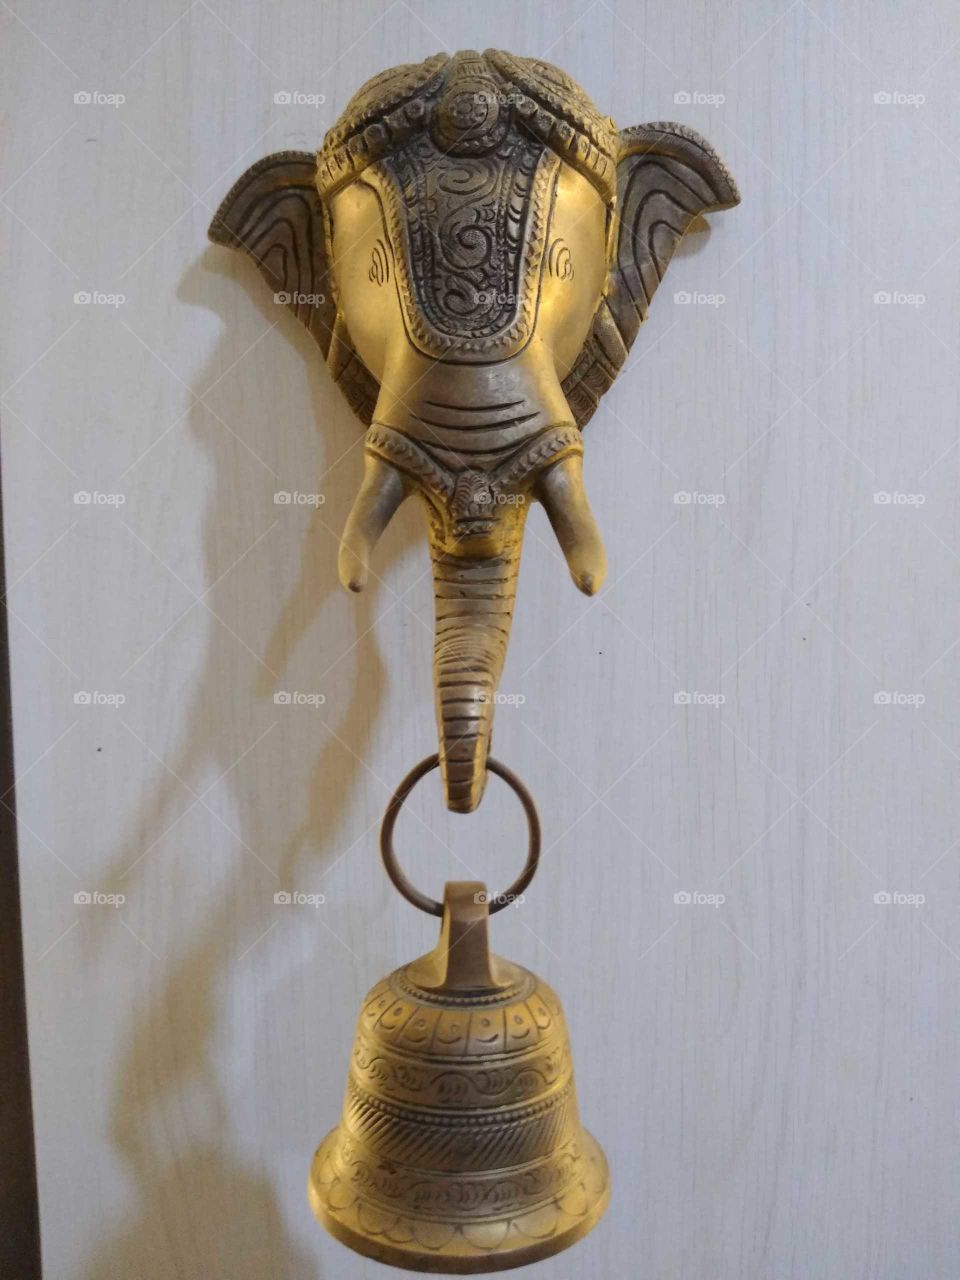 a brass elephant bell on the wall